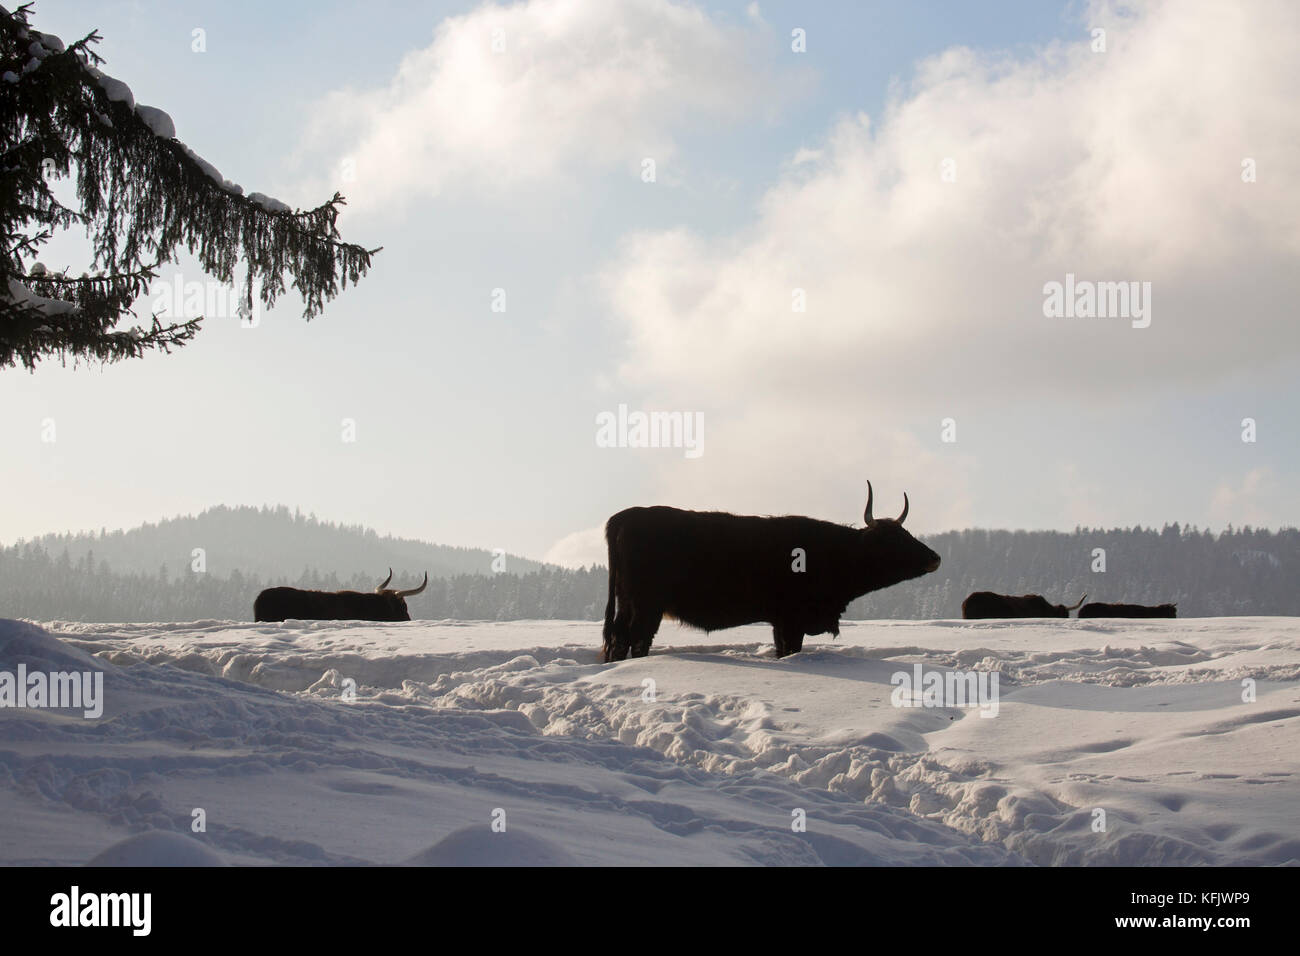 Heck cattle (Bos domesticus) bulls in the snow in winter Stock Photo